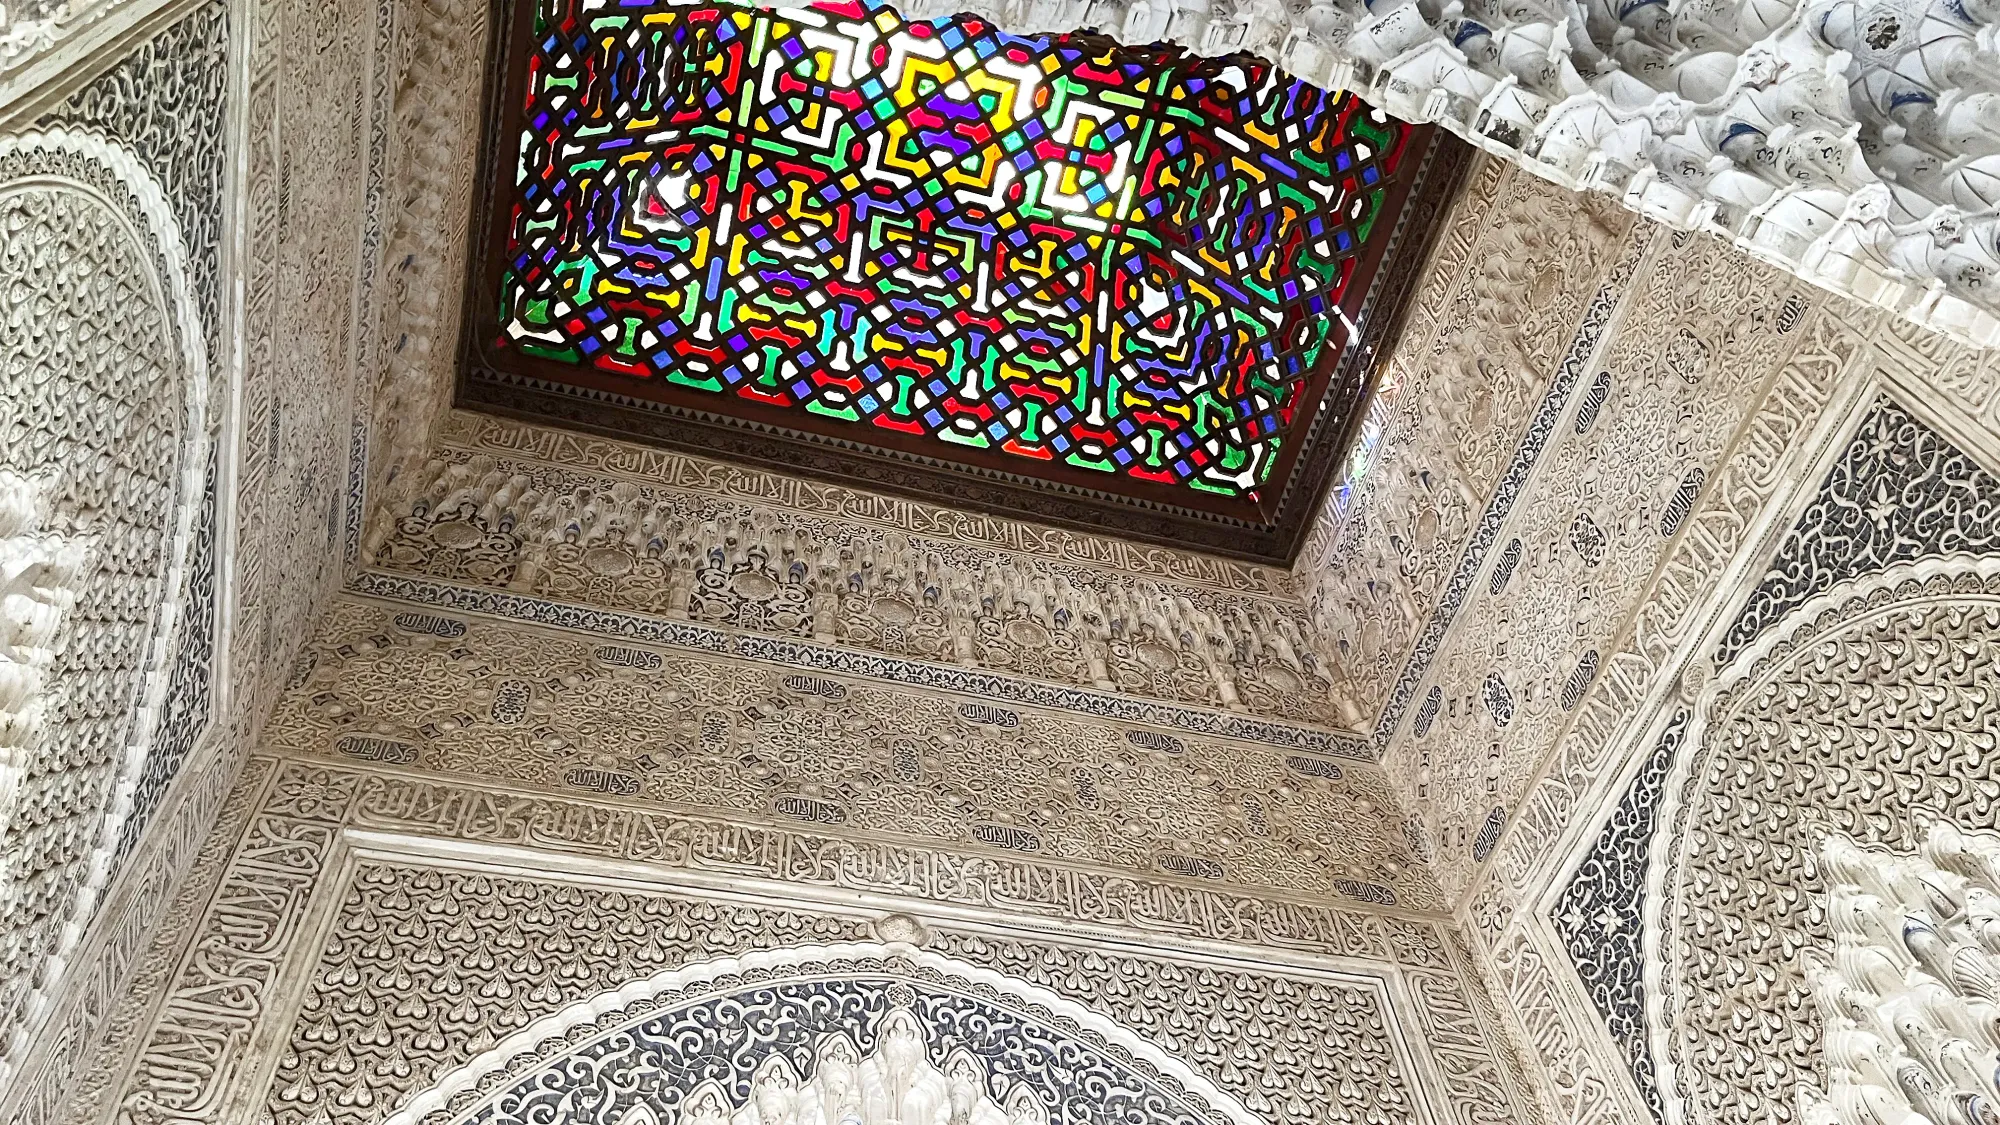 White tiled walls with red, yellow, and blue stained glass ceiling